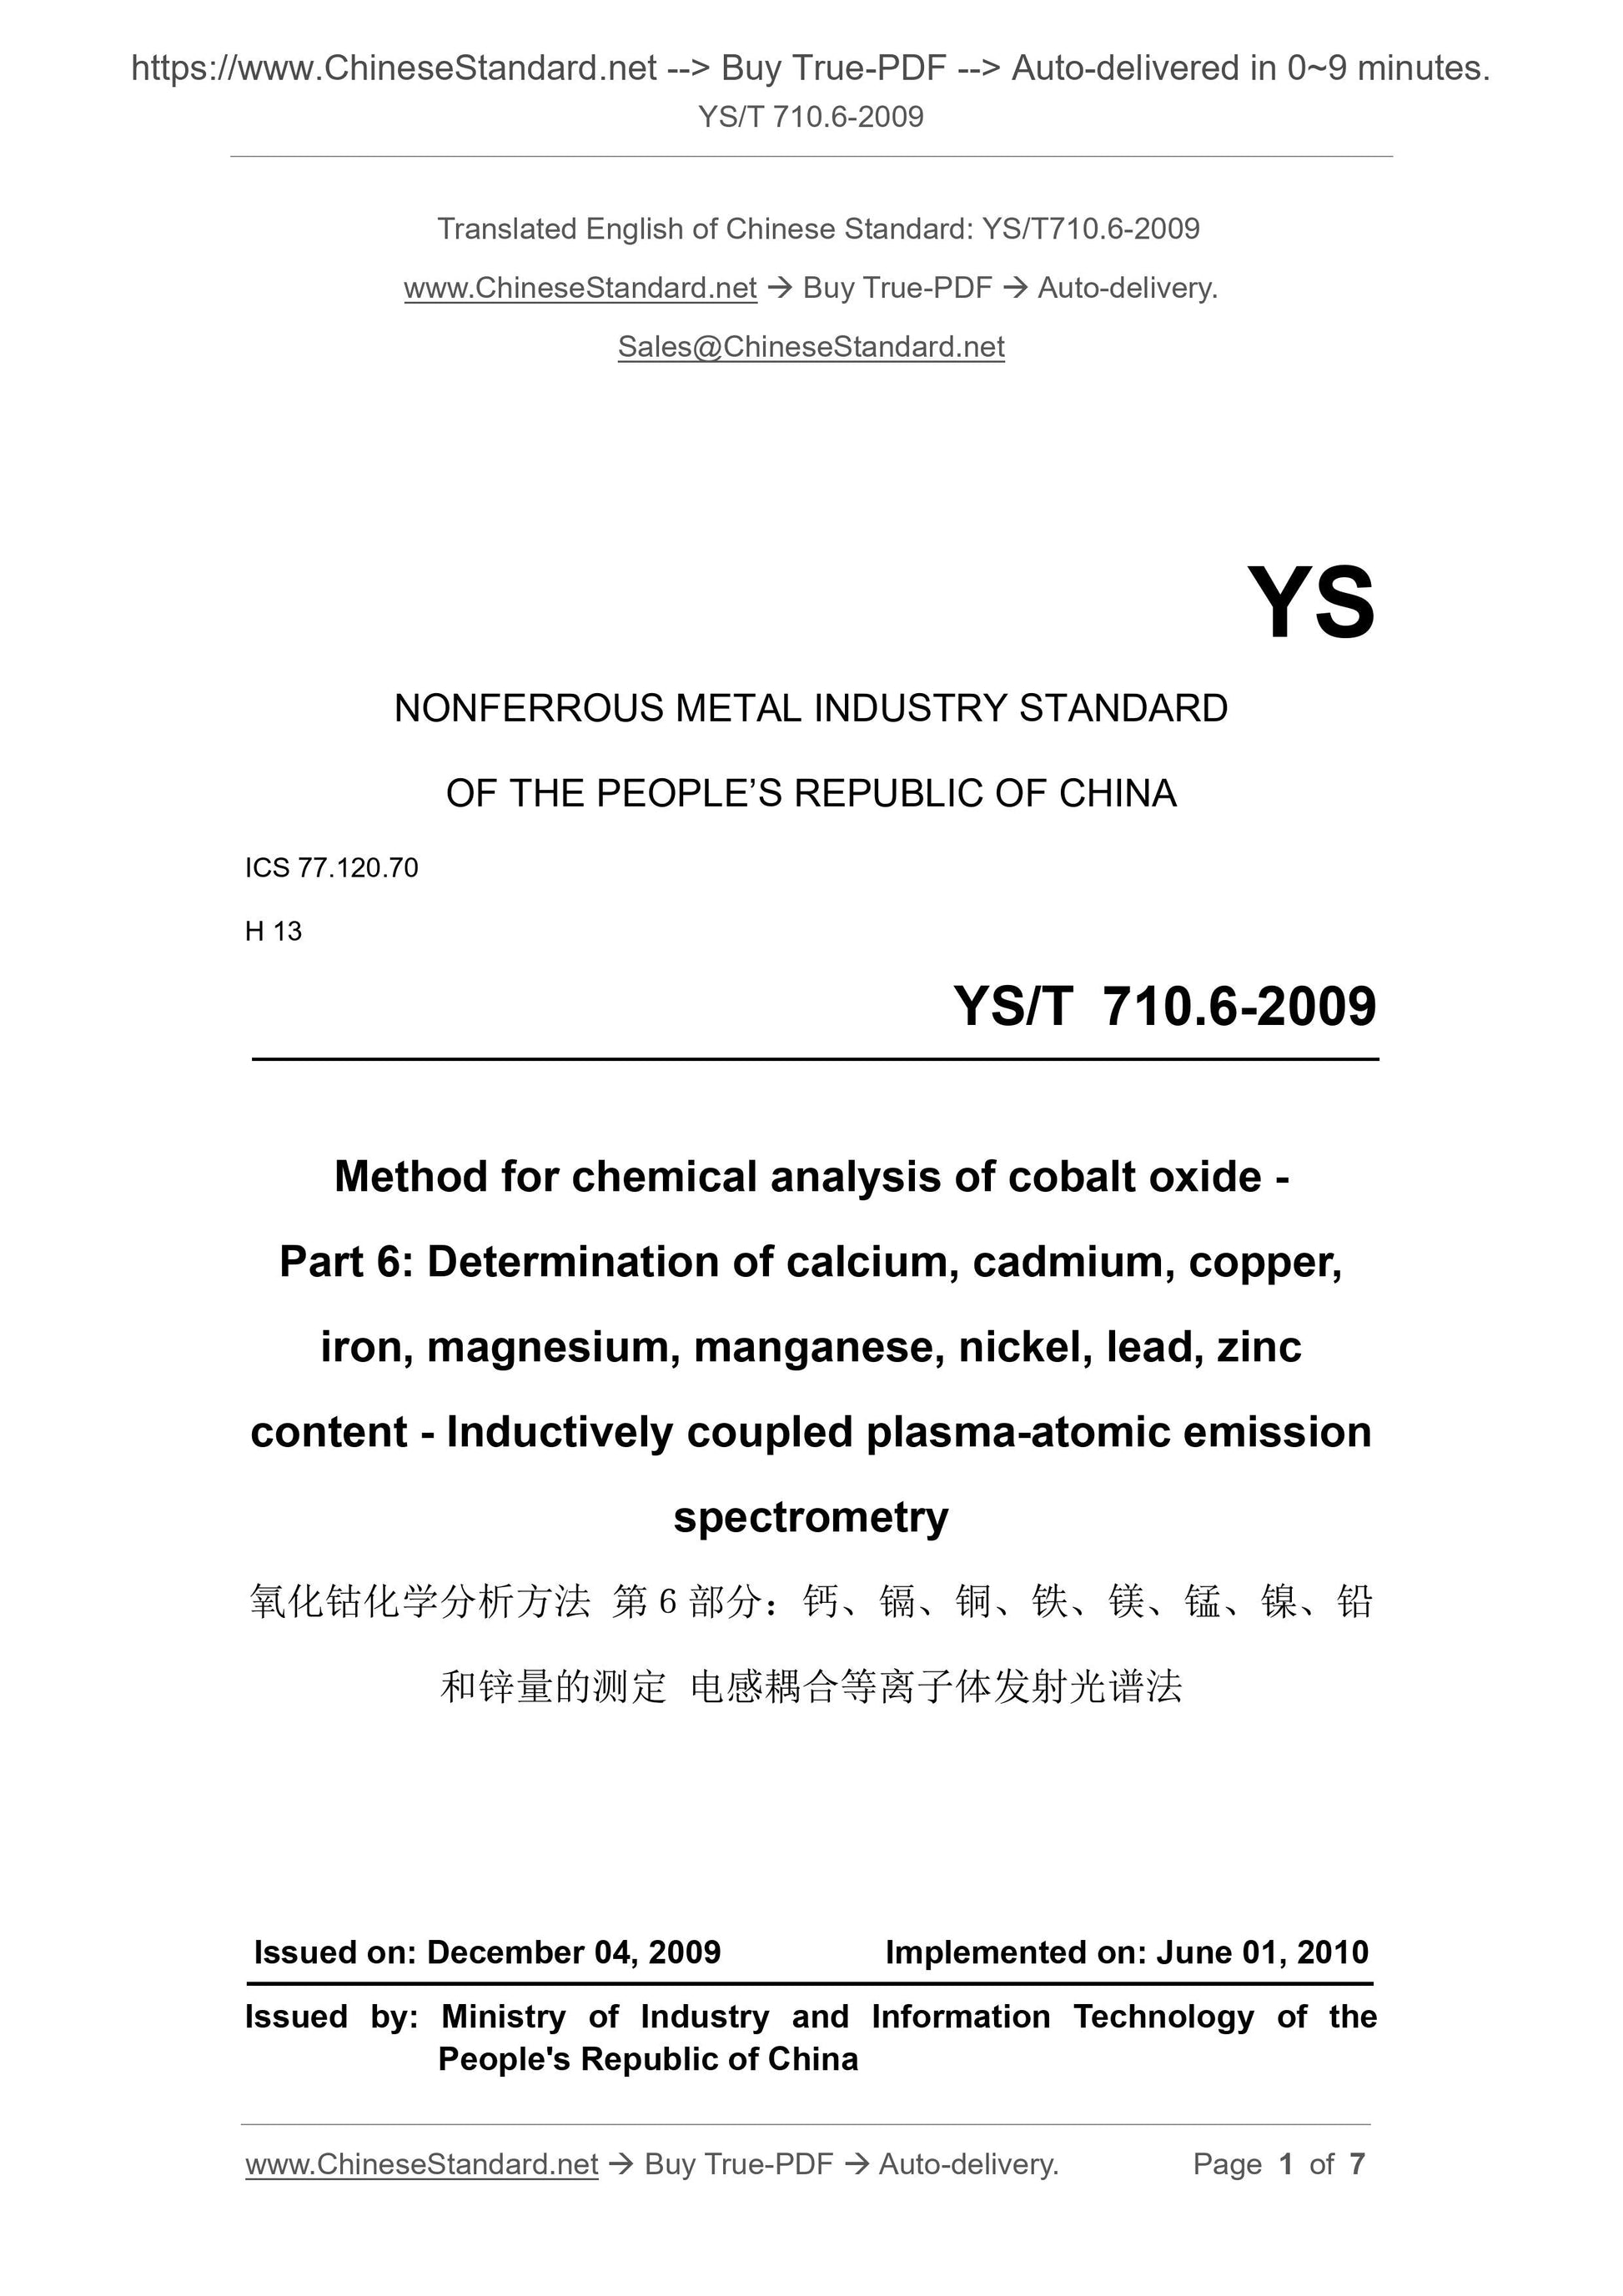 YS/T 710.6-2009 Page 1